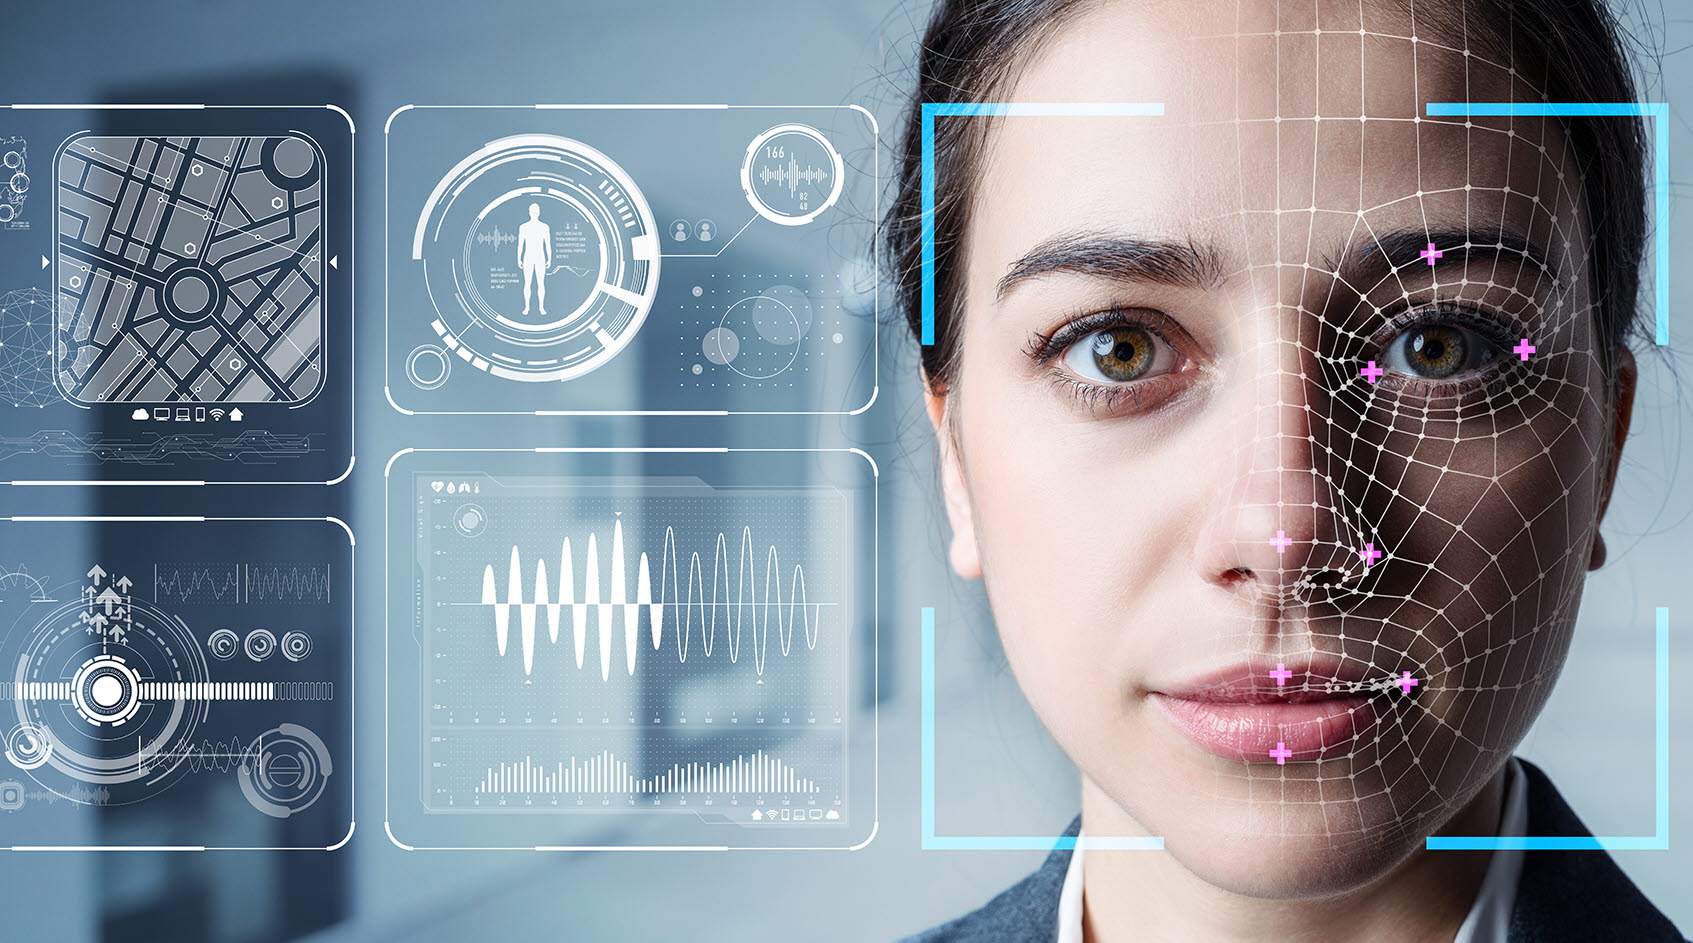 Image showing a women with facial recognition